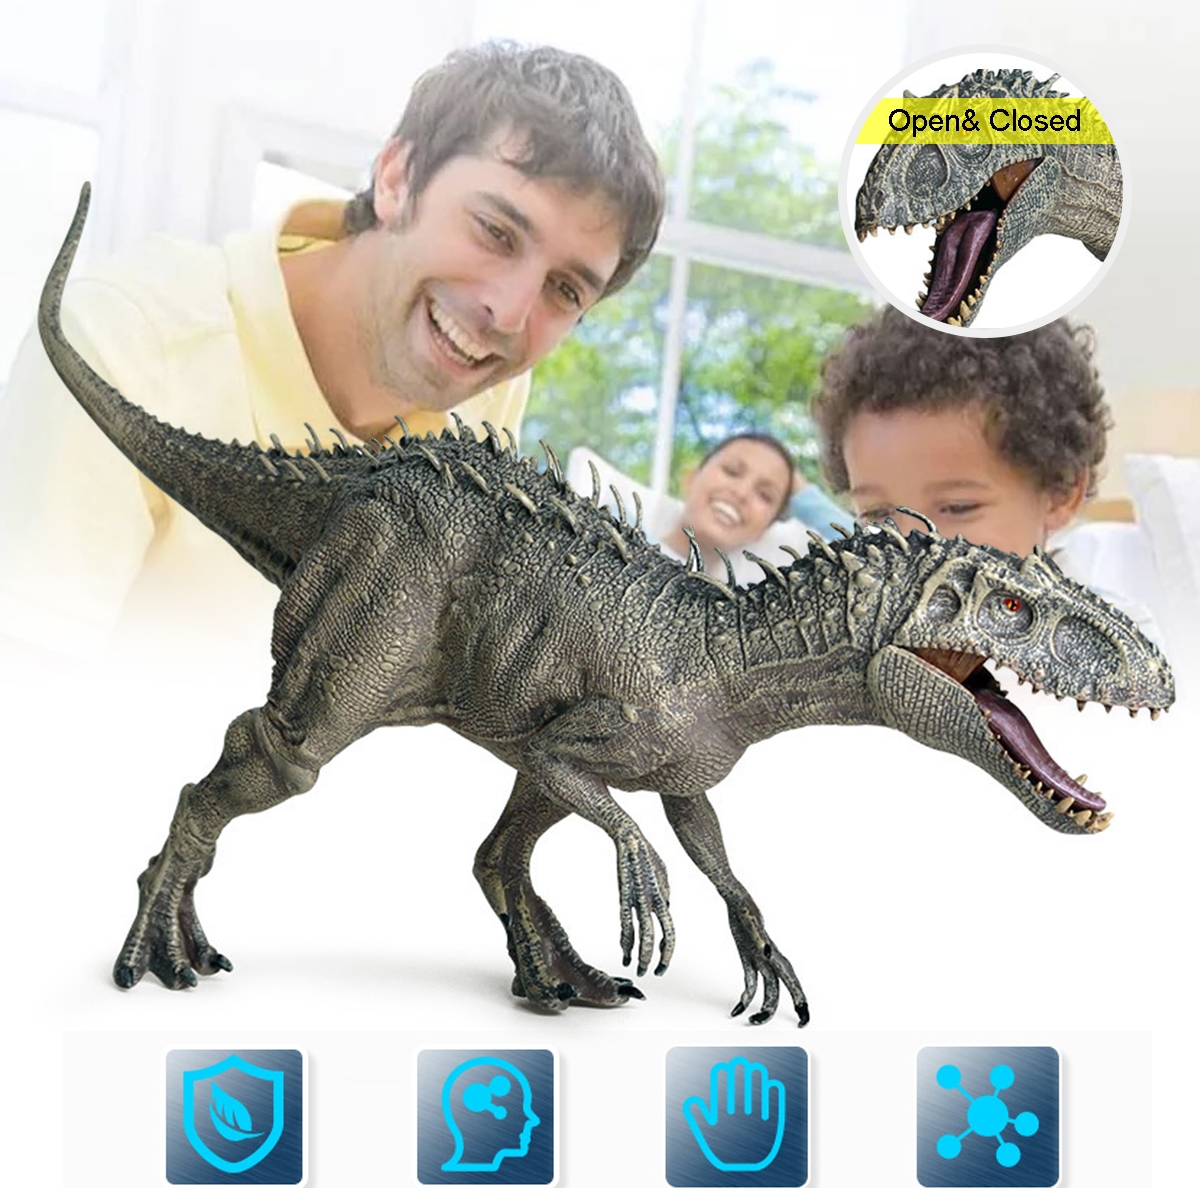 Jurassic Tyrannosaurus Rex Action Figures Mouth Opend Movable Static Dinosaur Animals Plastic Model Toy for Kids Gift